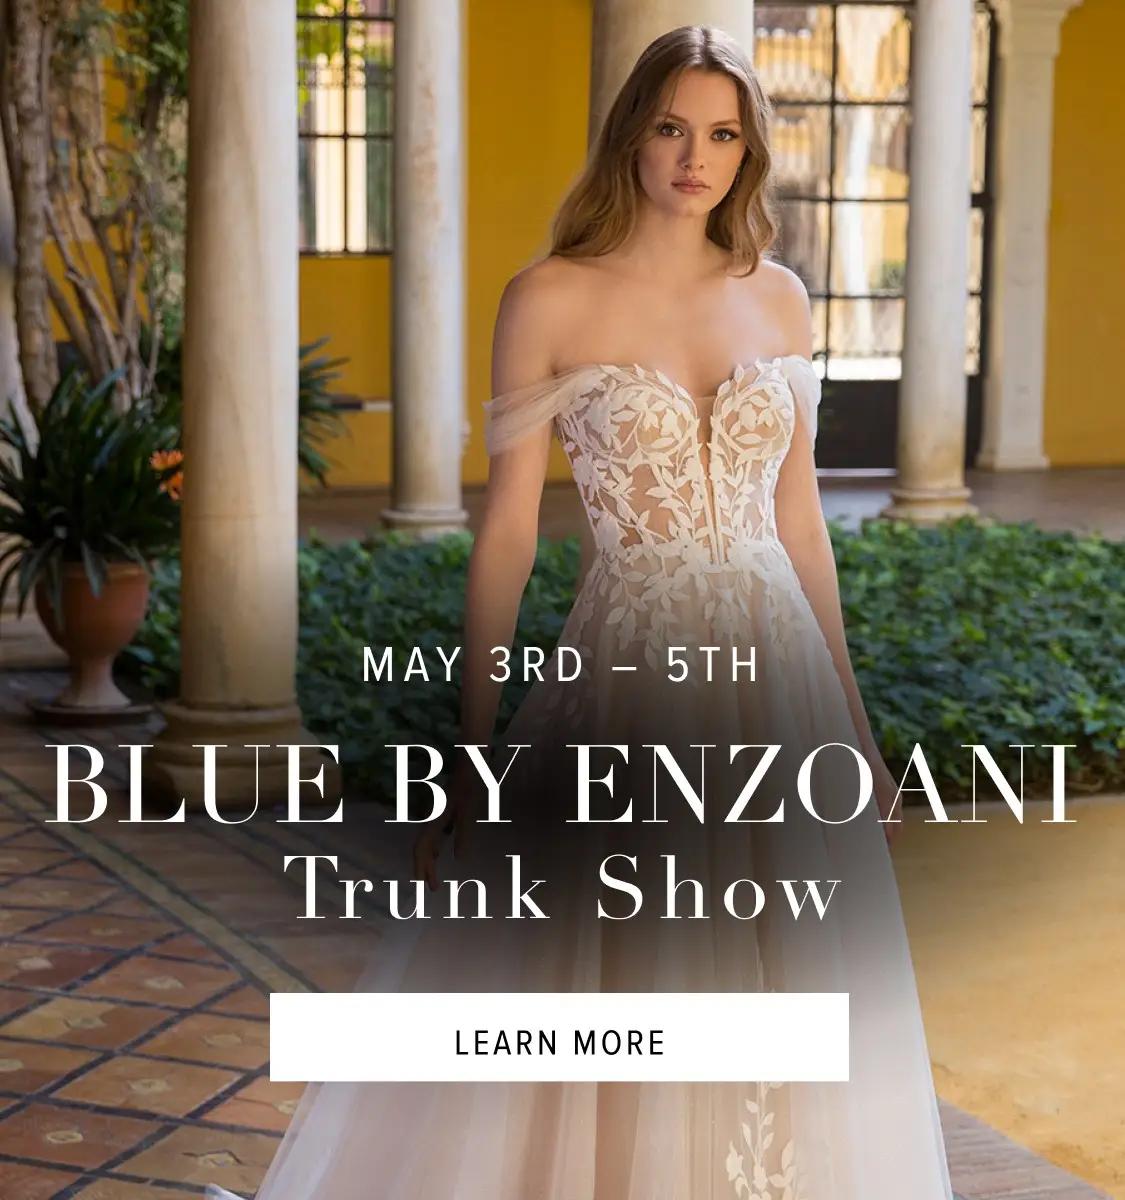 Blue by enzoani trunk show mobile banner